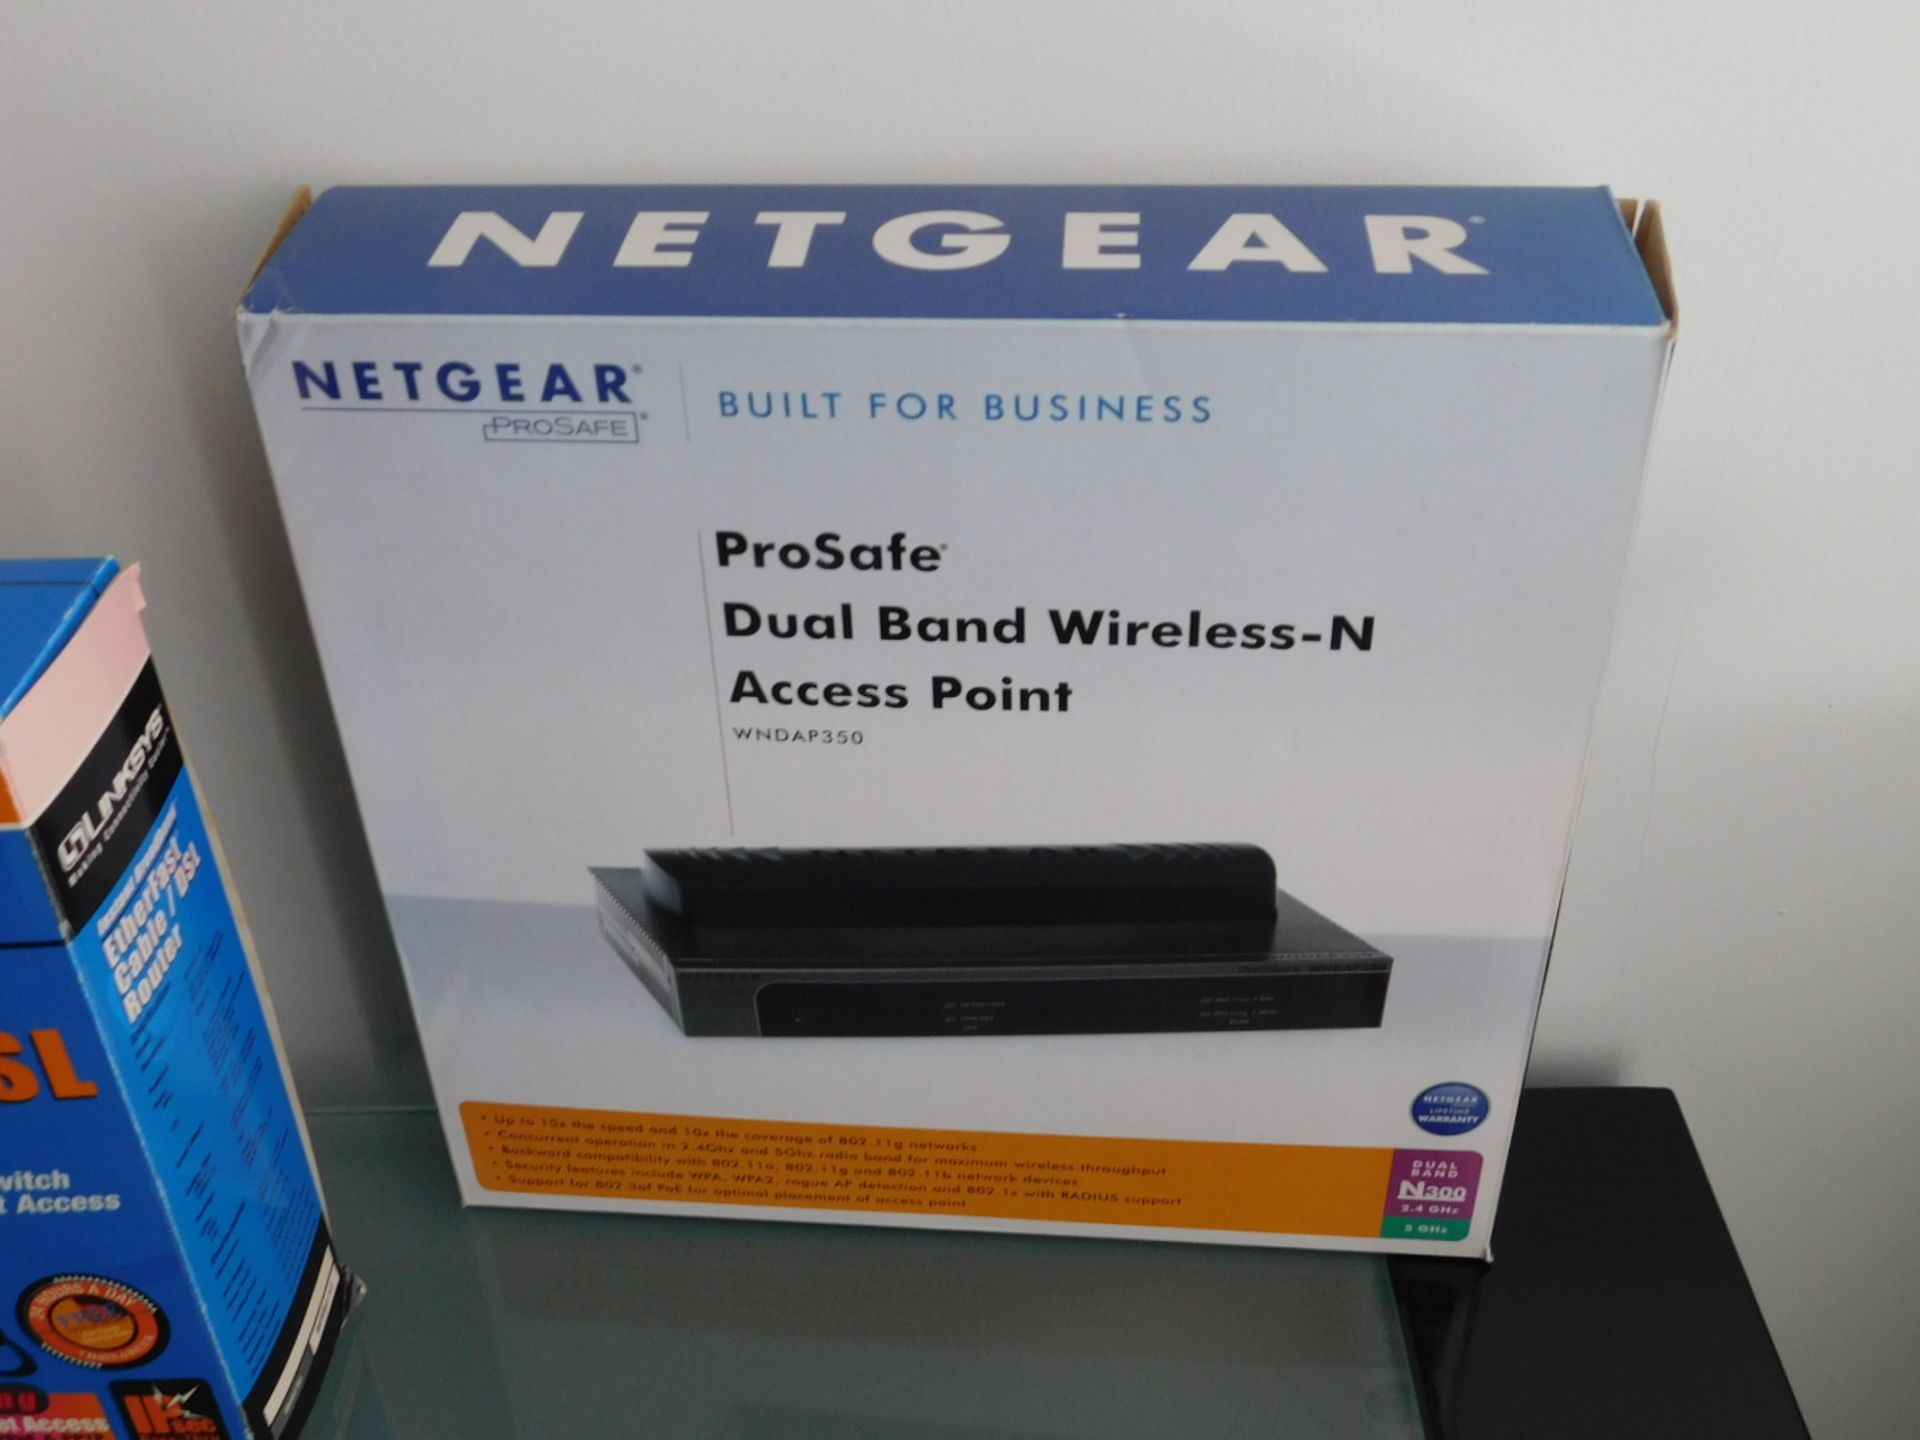 LINKSYS ETHERFAST CABLE/DSL ROUTER4 and NETGEAR PRO-SAFEW DUAL BAND WIRELESS - N ACCESS POINT - Image 2 of 2